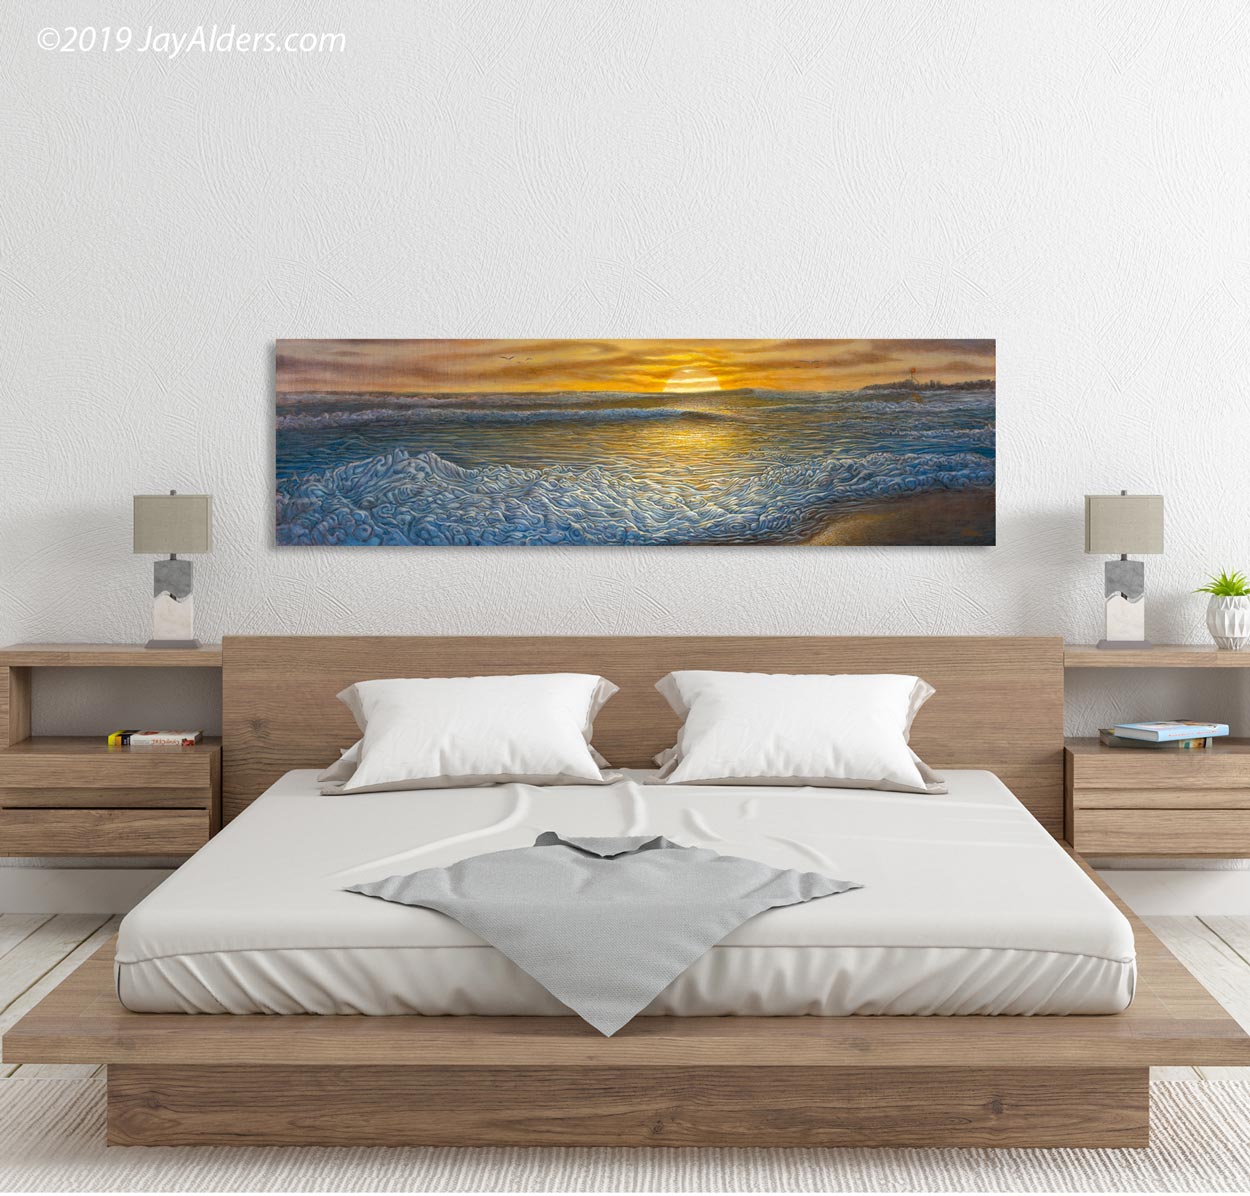 Fall Swell At The Inlet - Contemporary Surf Ocean Print of Manasquan NJ